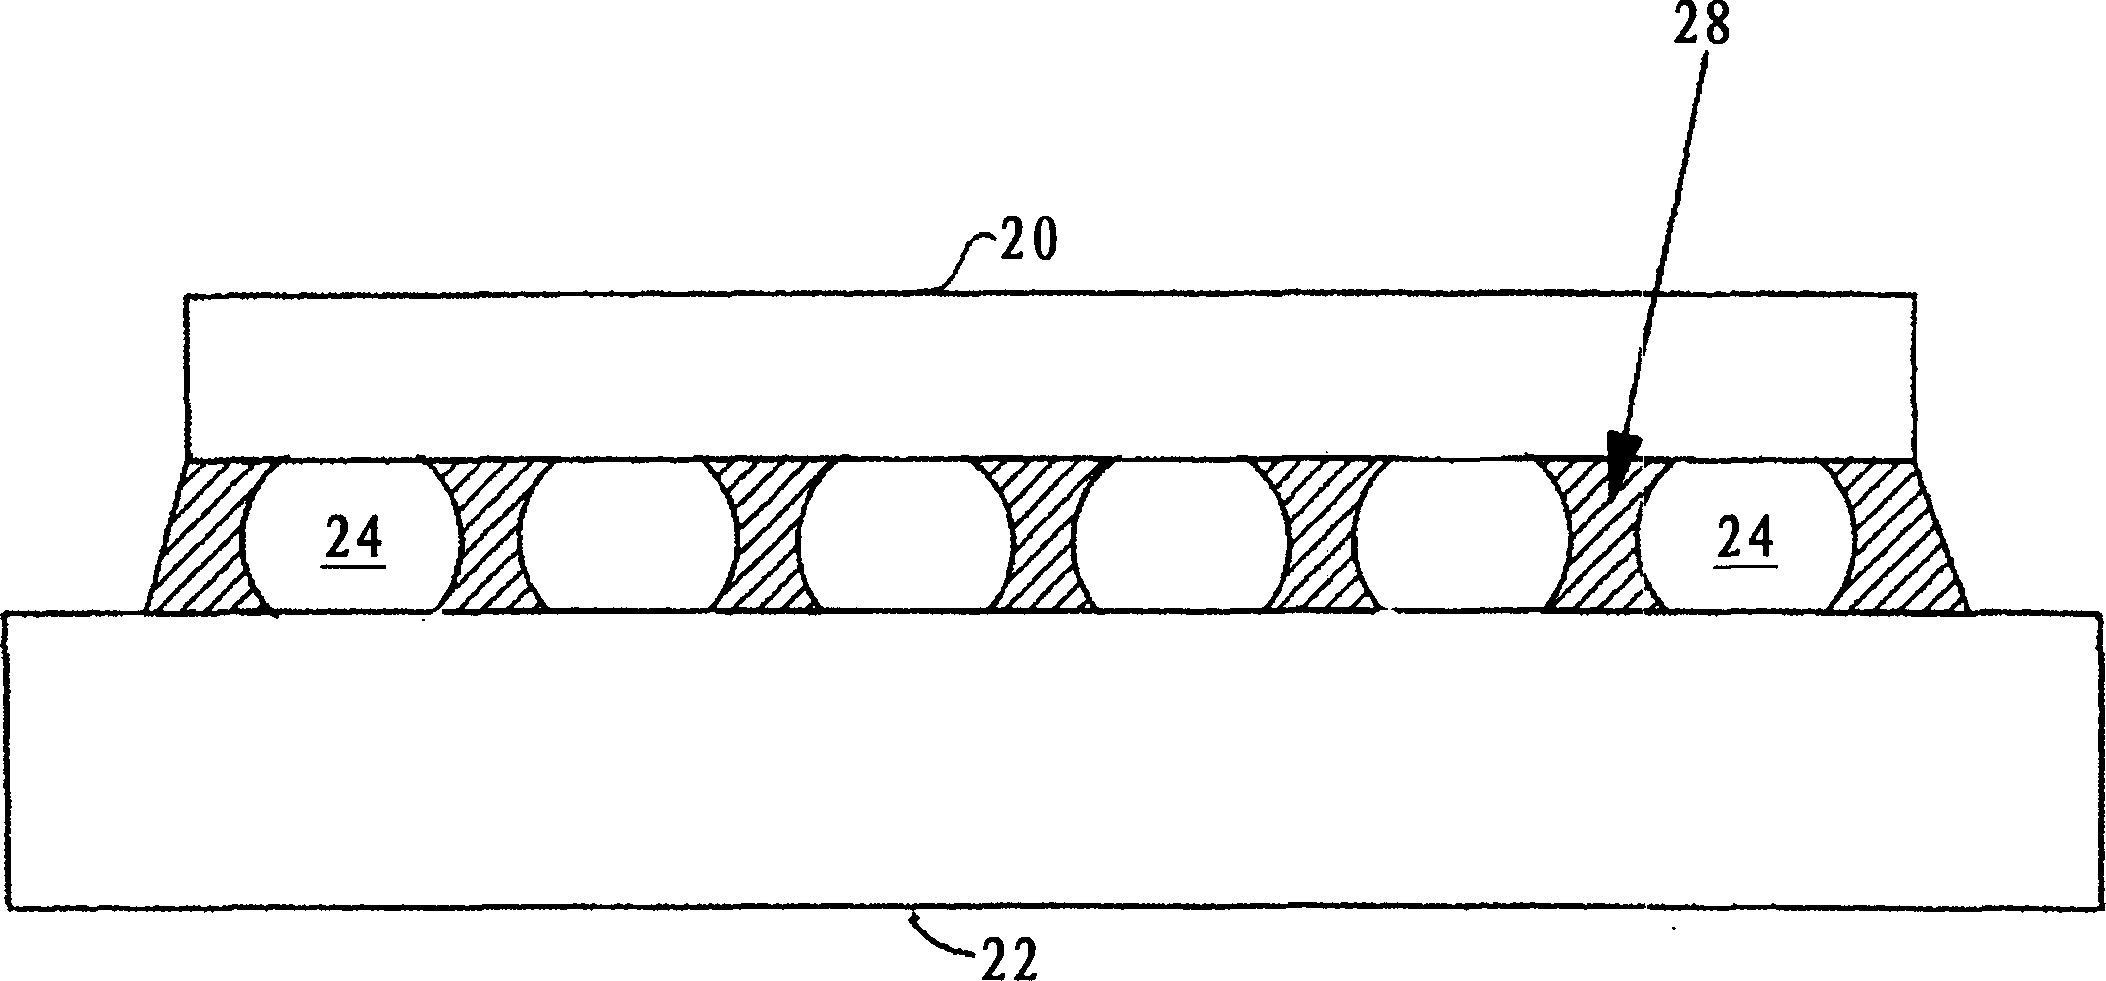 Solder interconnect structure and method using injection molded solder